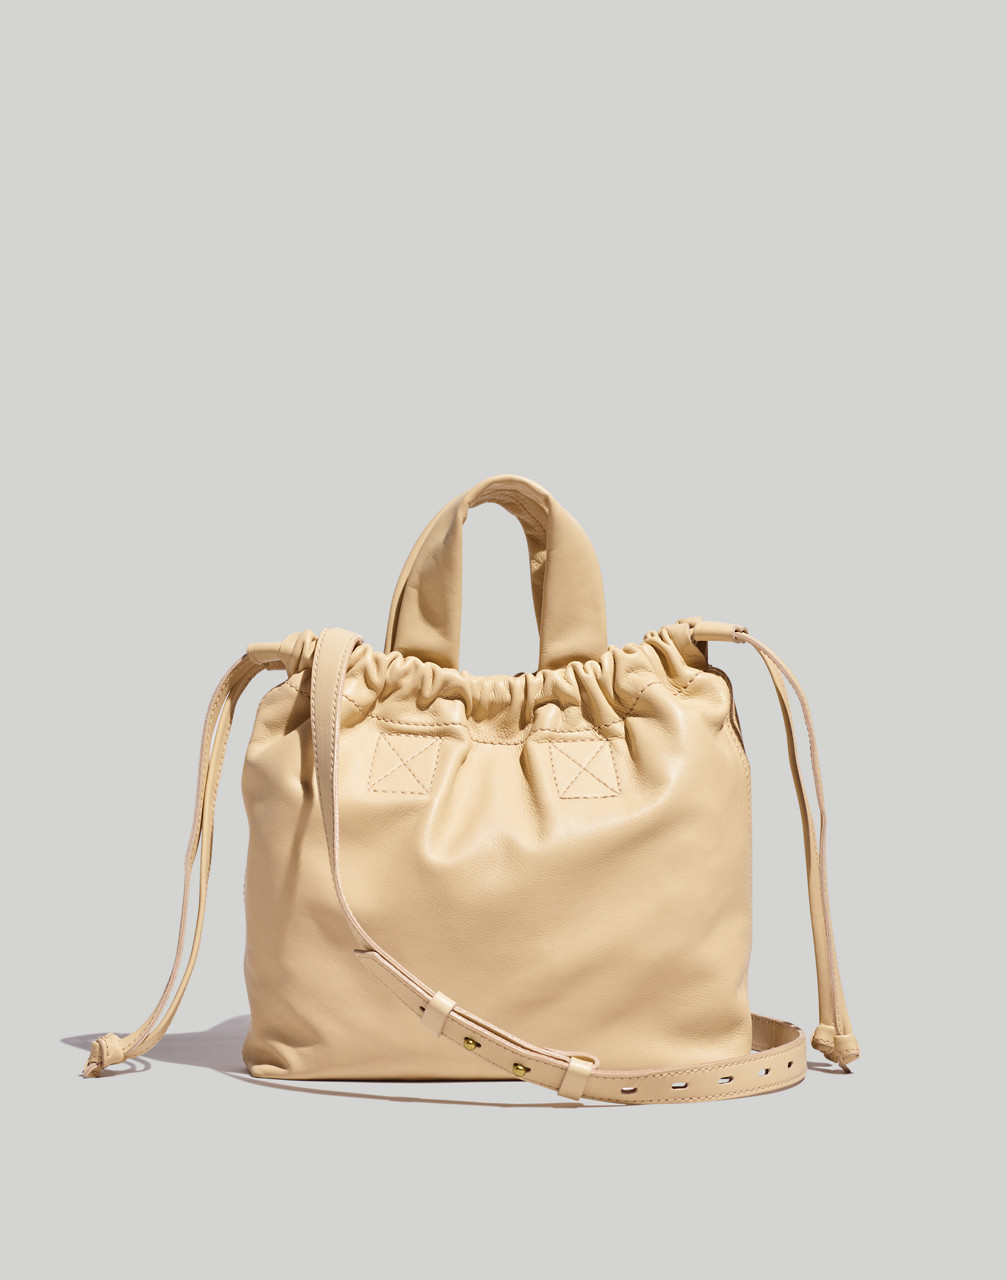 Mw The Piazza Crossbody Bag In Buttered Scone